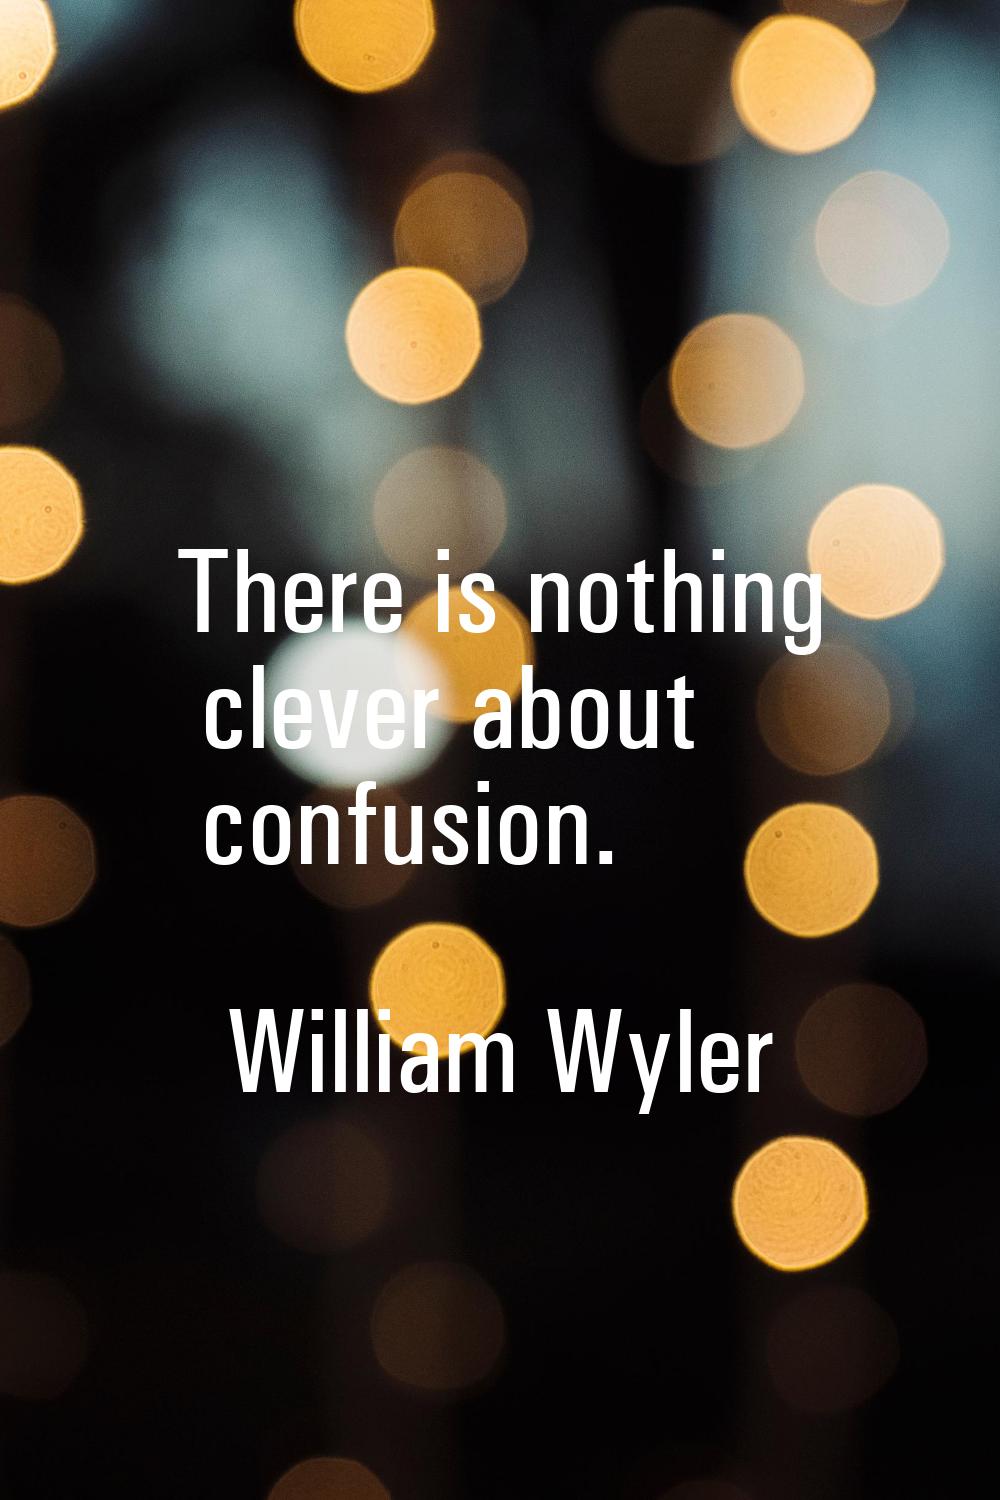 There is nothing clever about confusion.